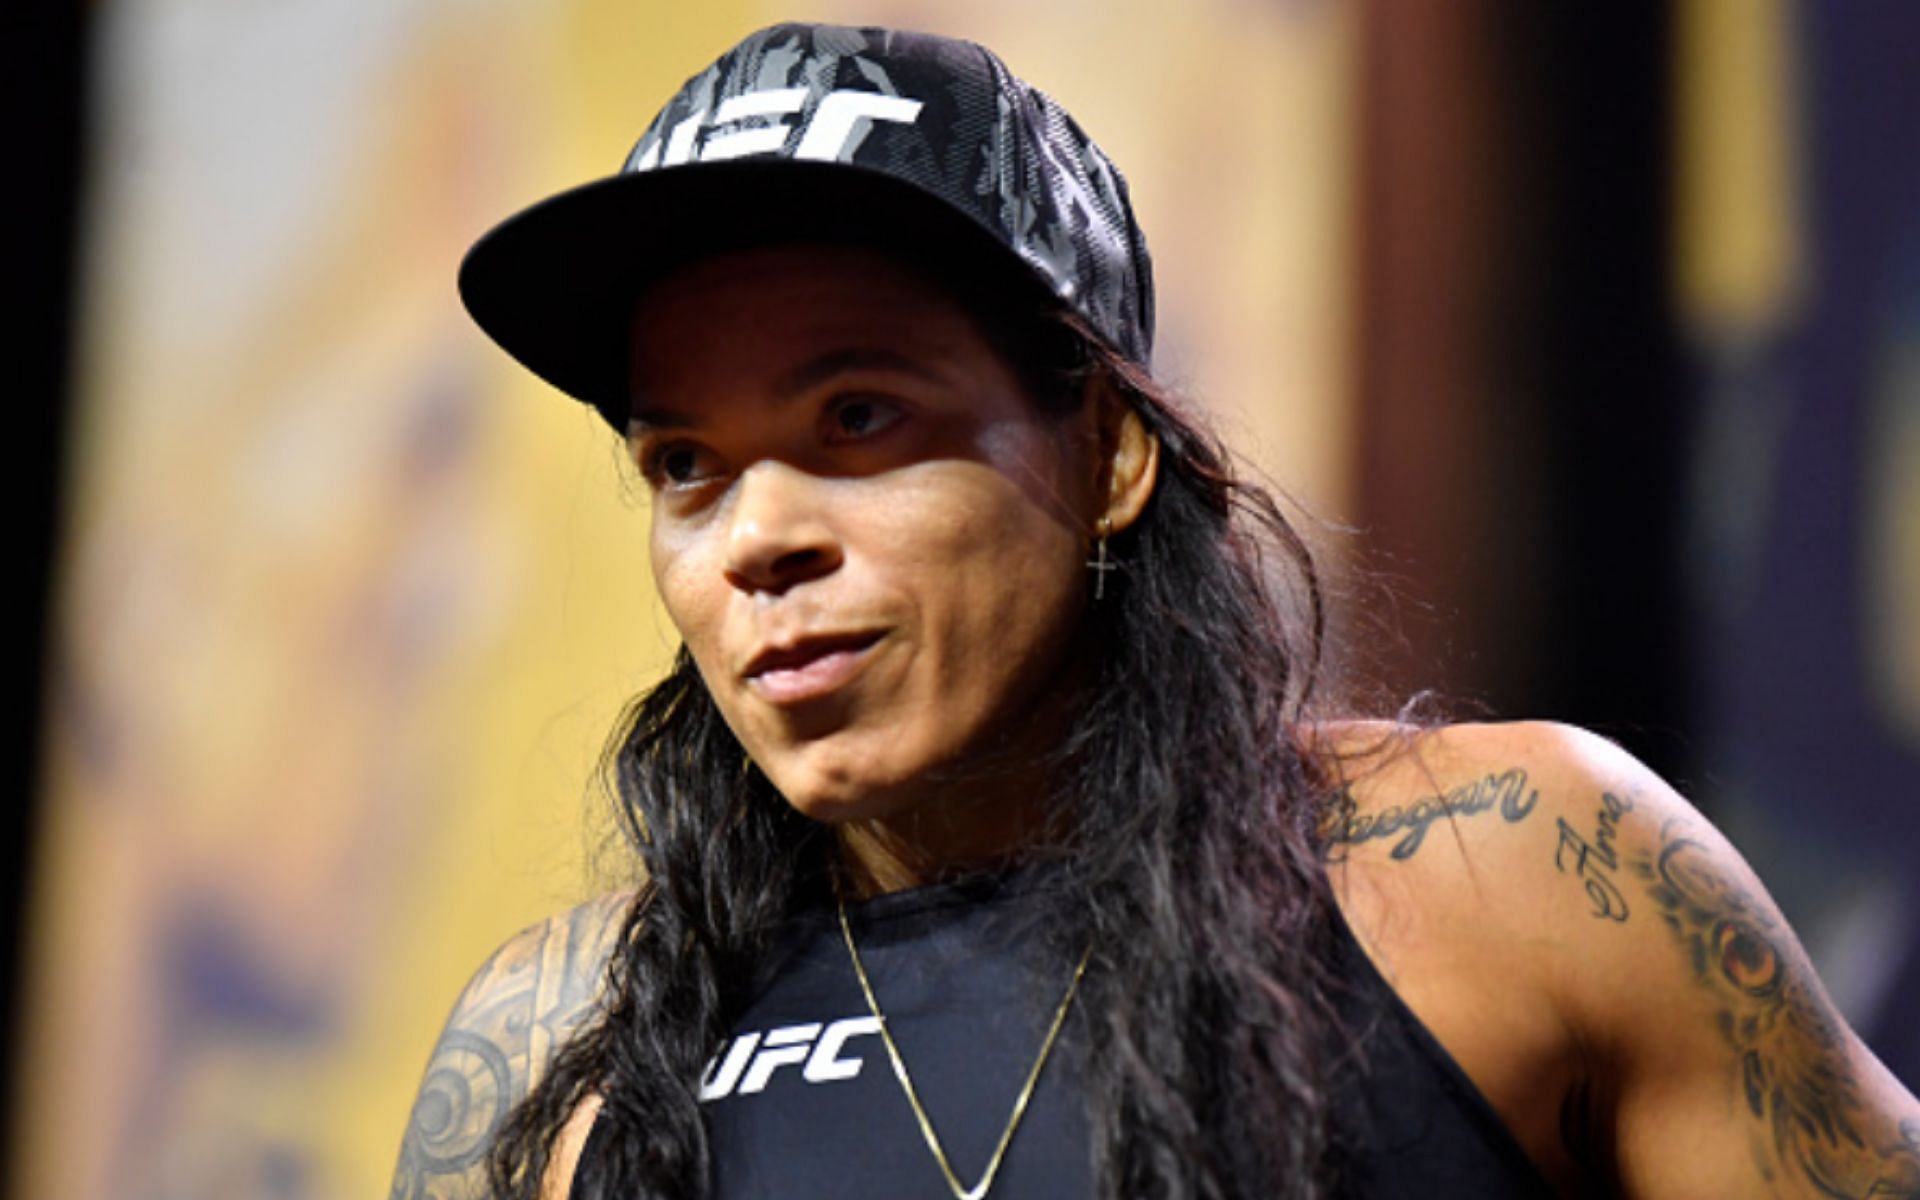 Amanda Nunes is regarded as one of the greatest MMA fighters ever